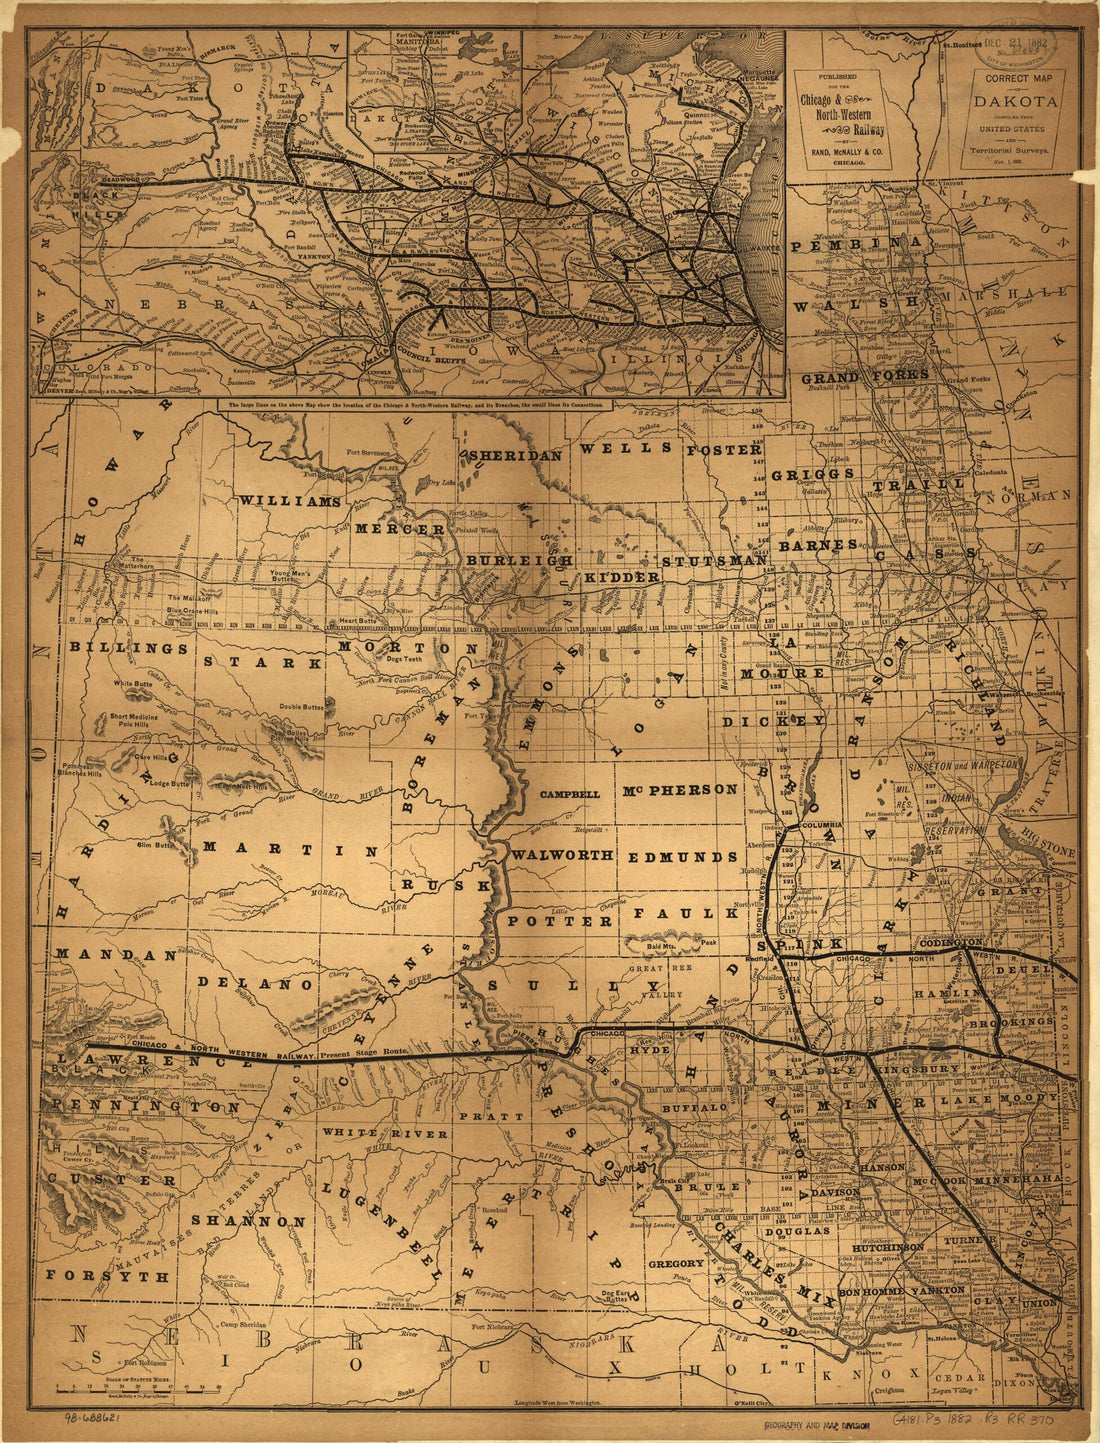 This old map of Correct Map of Dakota Compiled from United States and Territorial Surveys Nov. 1, from 1882 was created by  Chicago and North Western Railway Company,  Rand McNally and Company in 1882